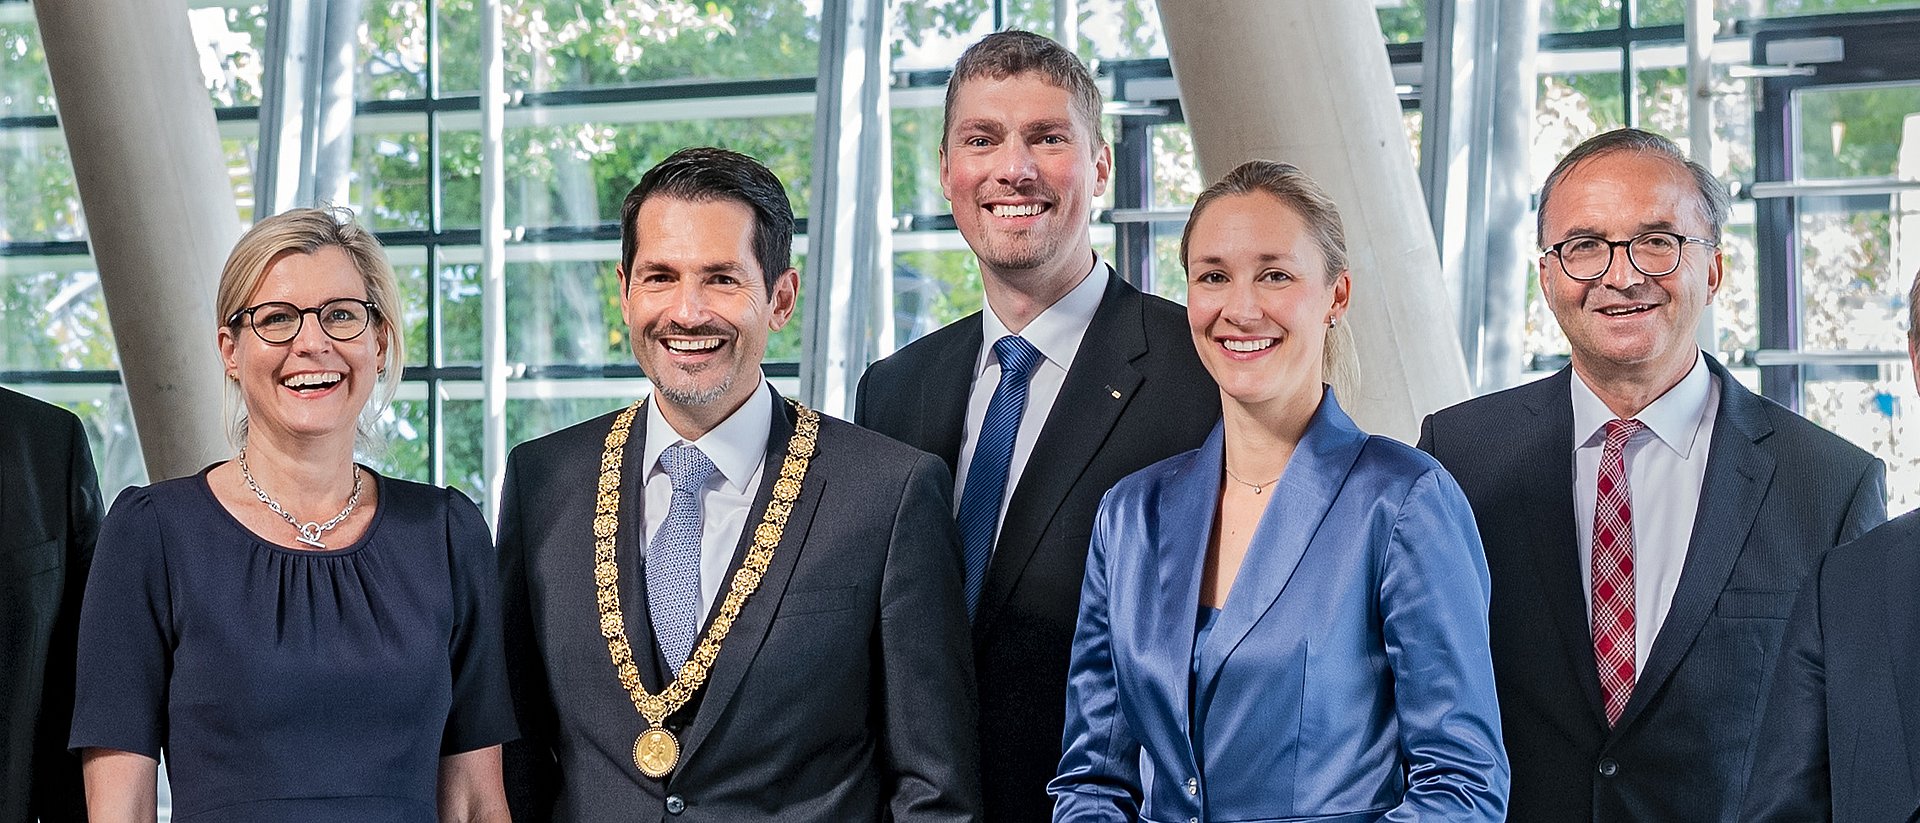 Thomas F. Hofmann, President of TUM (2nd from left) and the four Senior Vice Presidents who were recently re-elected